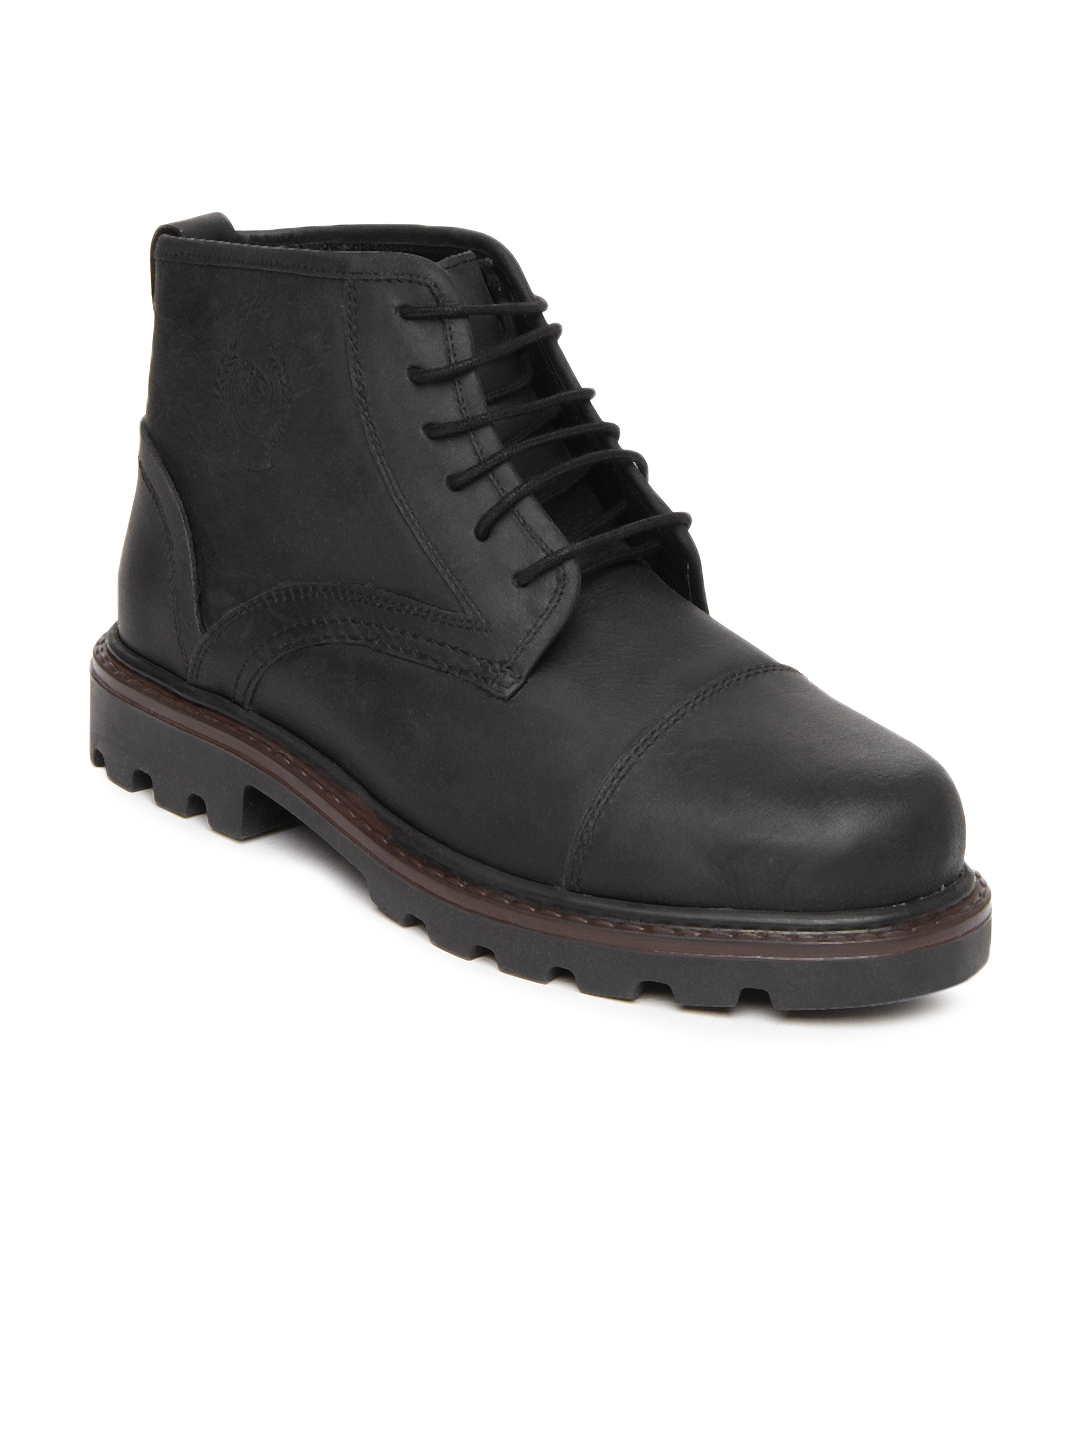 Buy U.S. Polo Assn. Men Black Leather Boots - Casual Shoes for Men